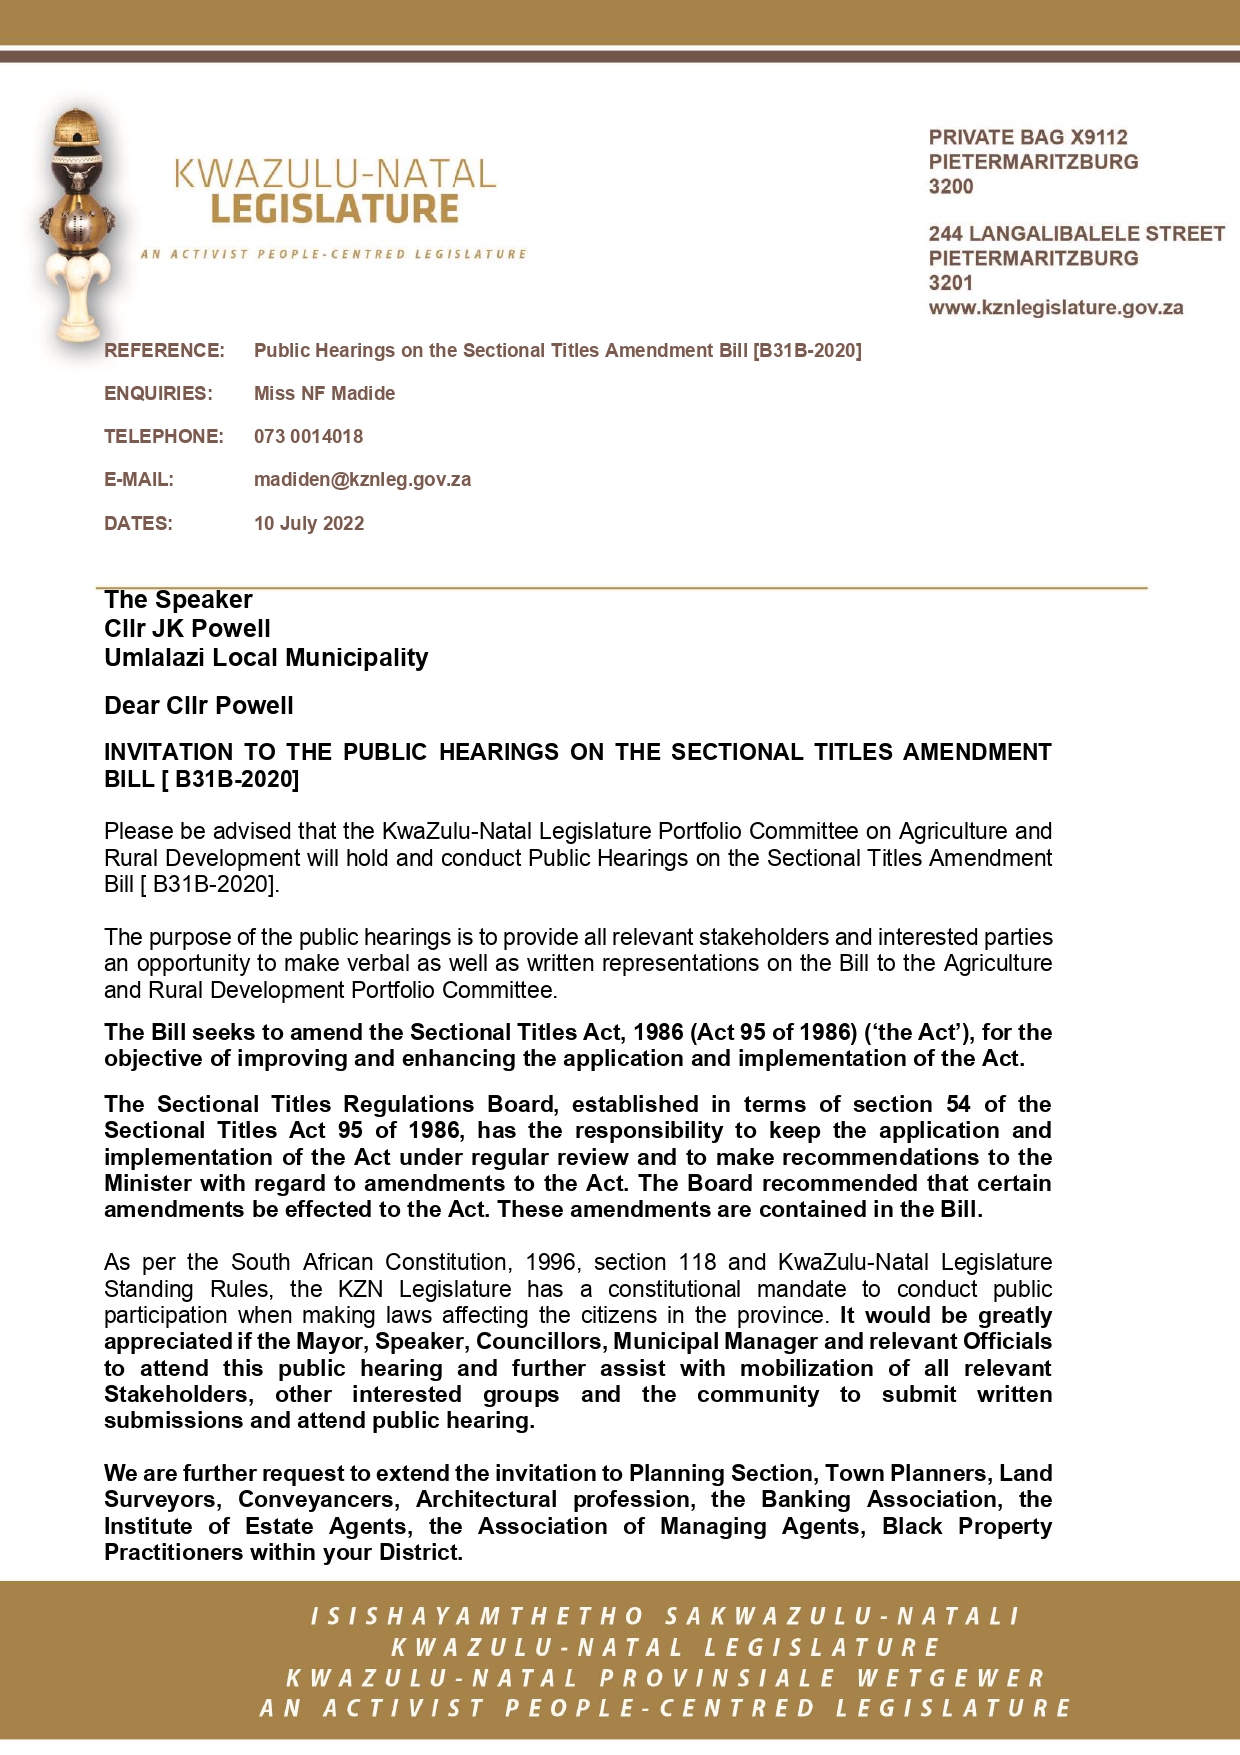 Letter to the Speaker regarding Sectional Titles Amendment Bill Public H page 0001